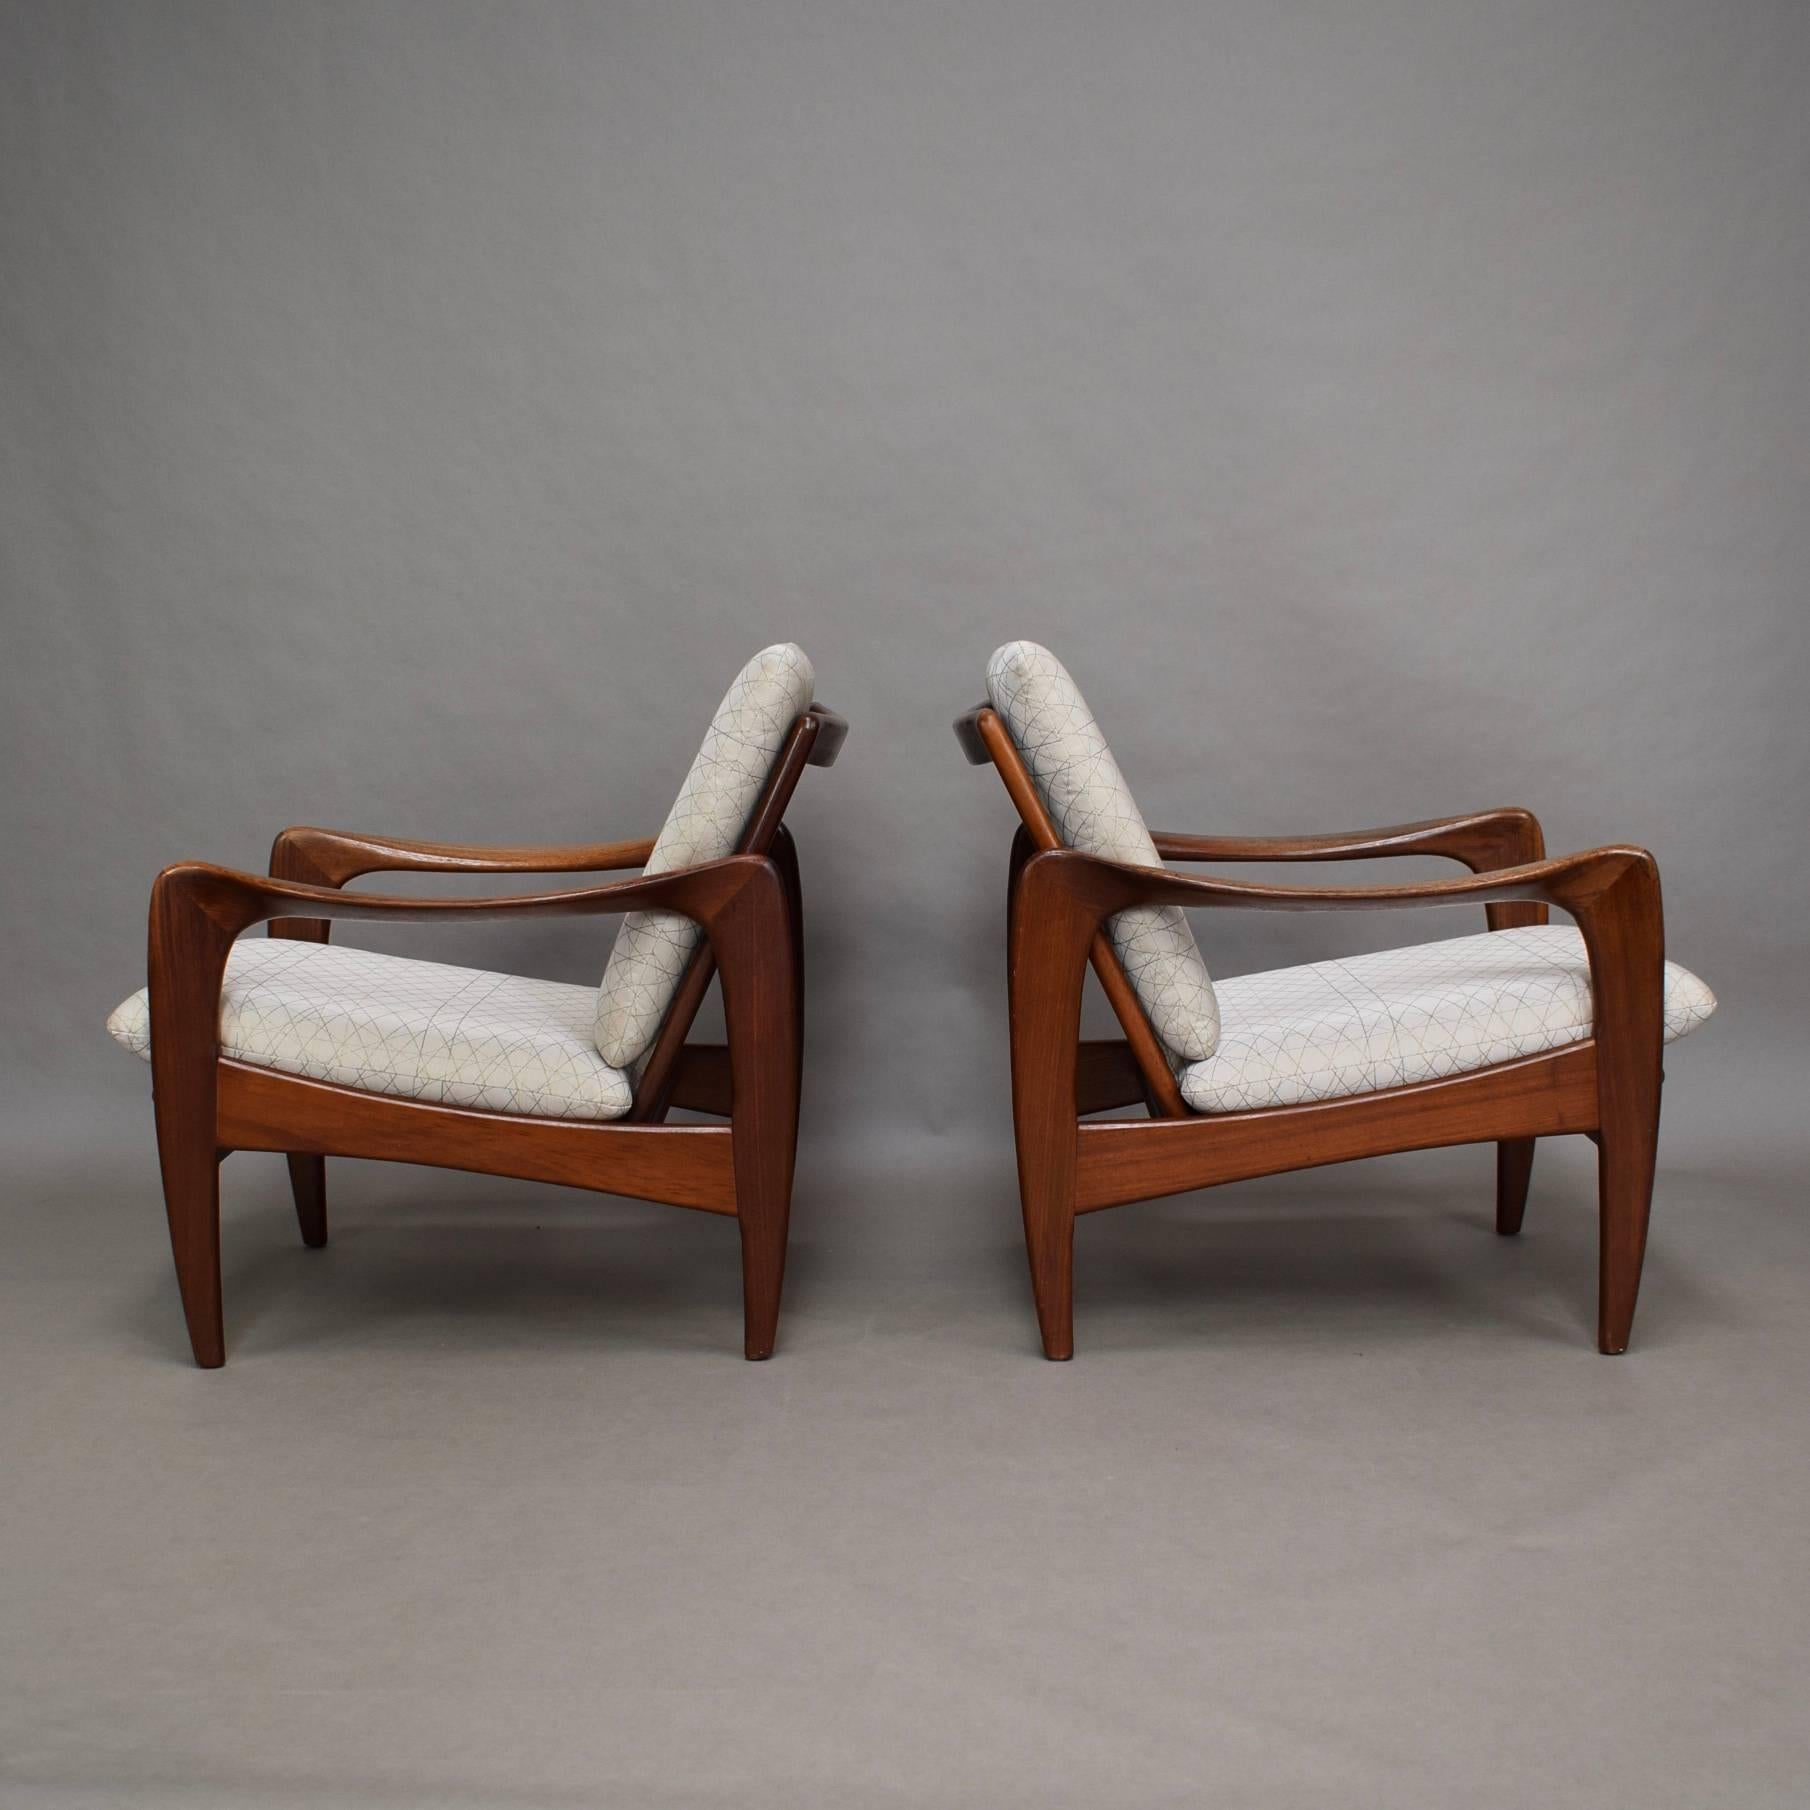 Pair of organic teak lounge chairs by De Ster Gelderland.

Manufacturer: De Ster Gelderland
Designer: Unknown
Country: Netherlands
Model: Lounge armchair
Material: Solid teak / new upholstery
Design period: 1960s
Date of manufacturing: